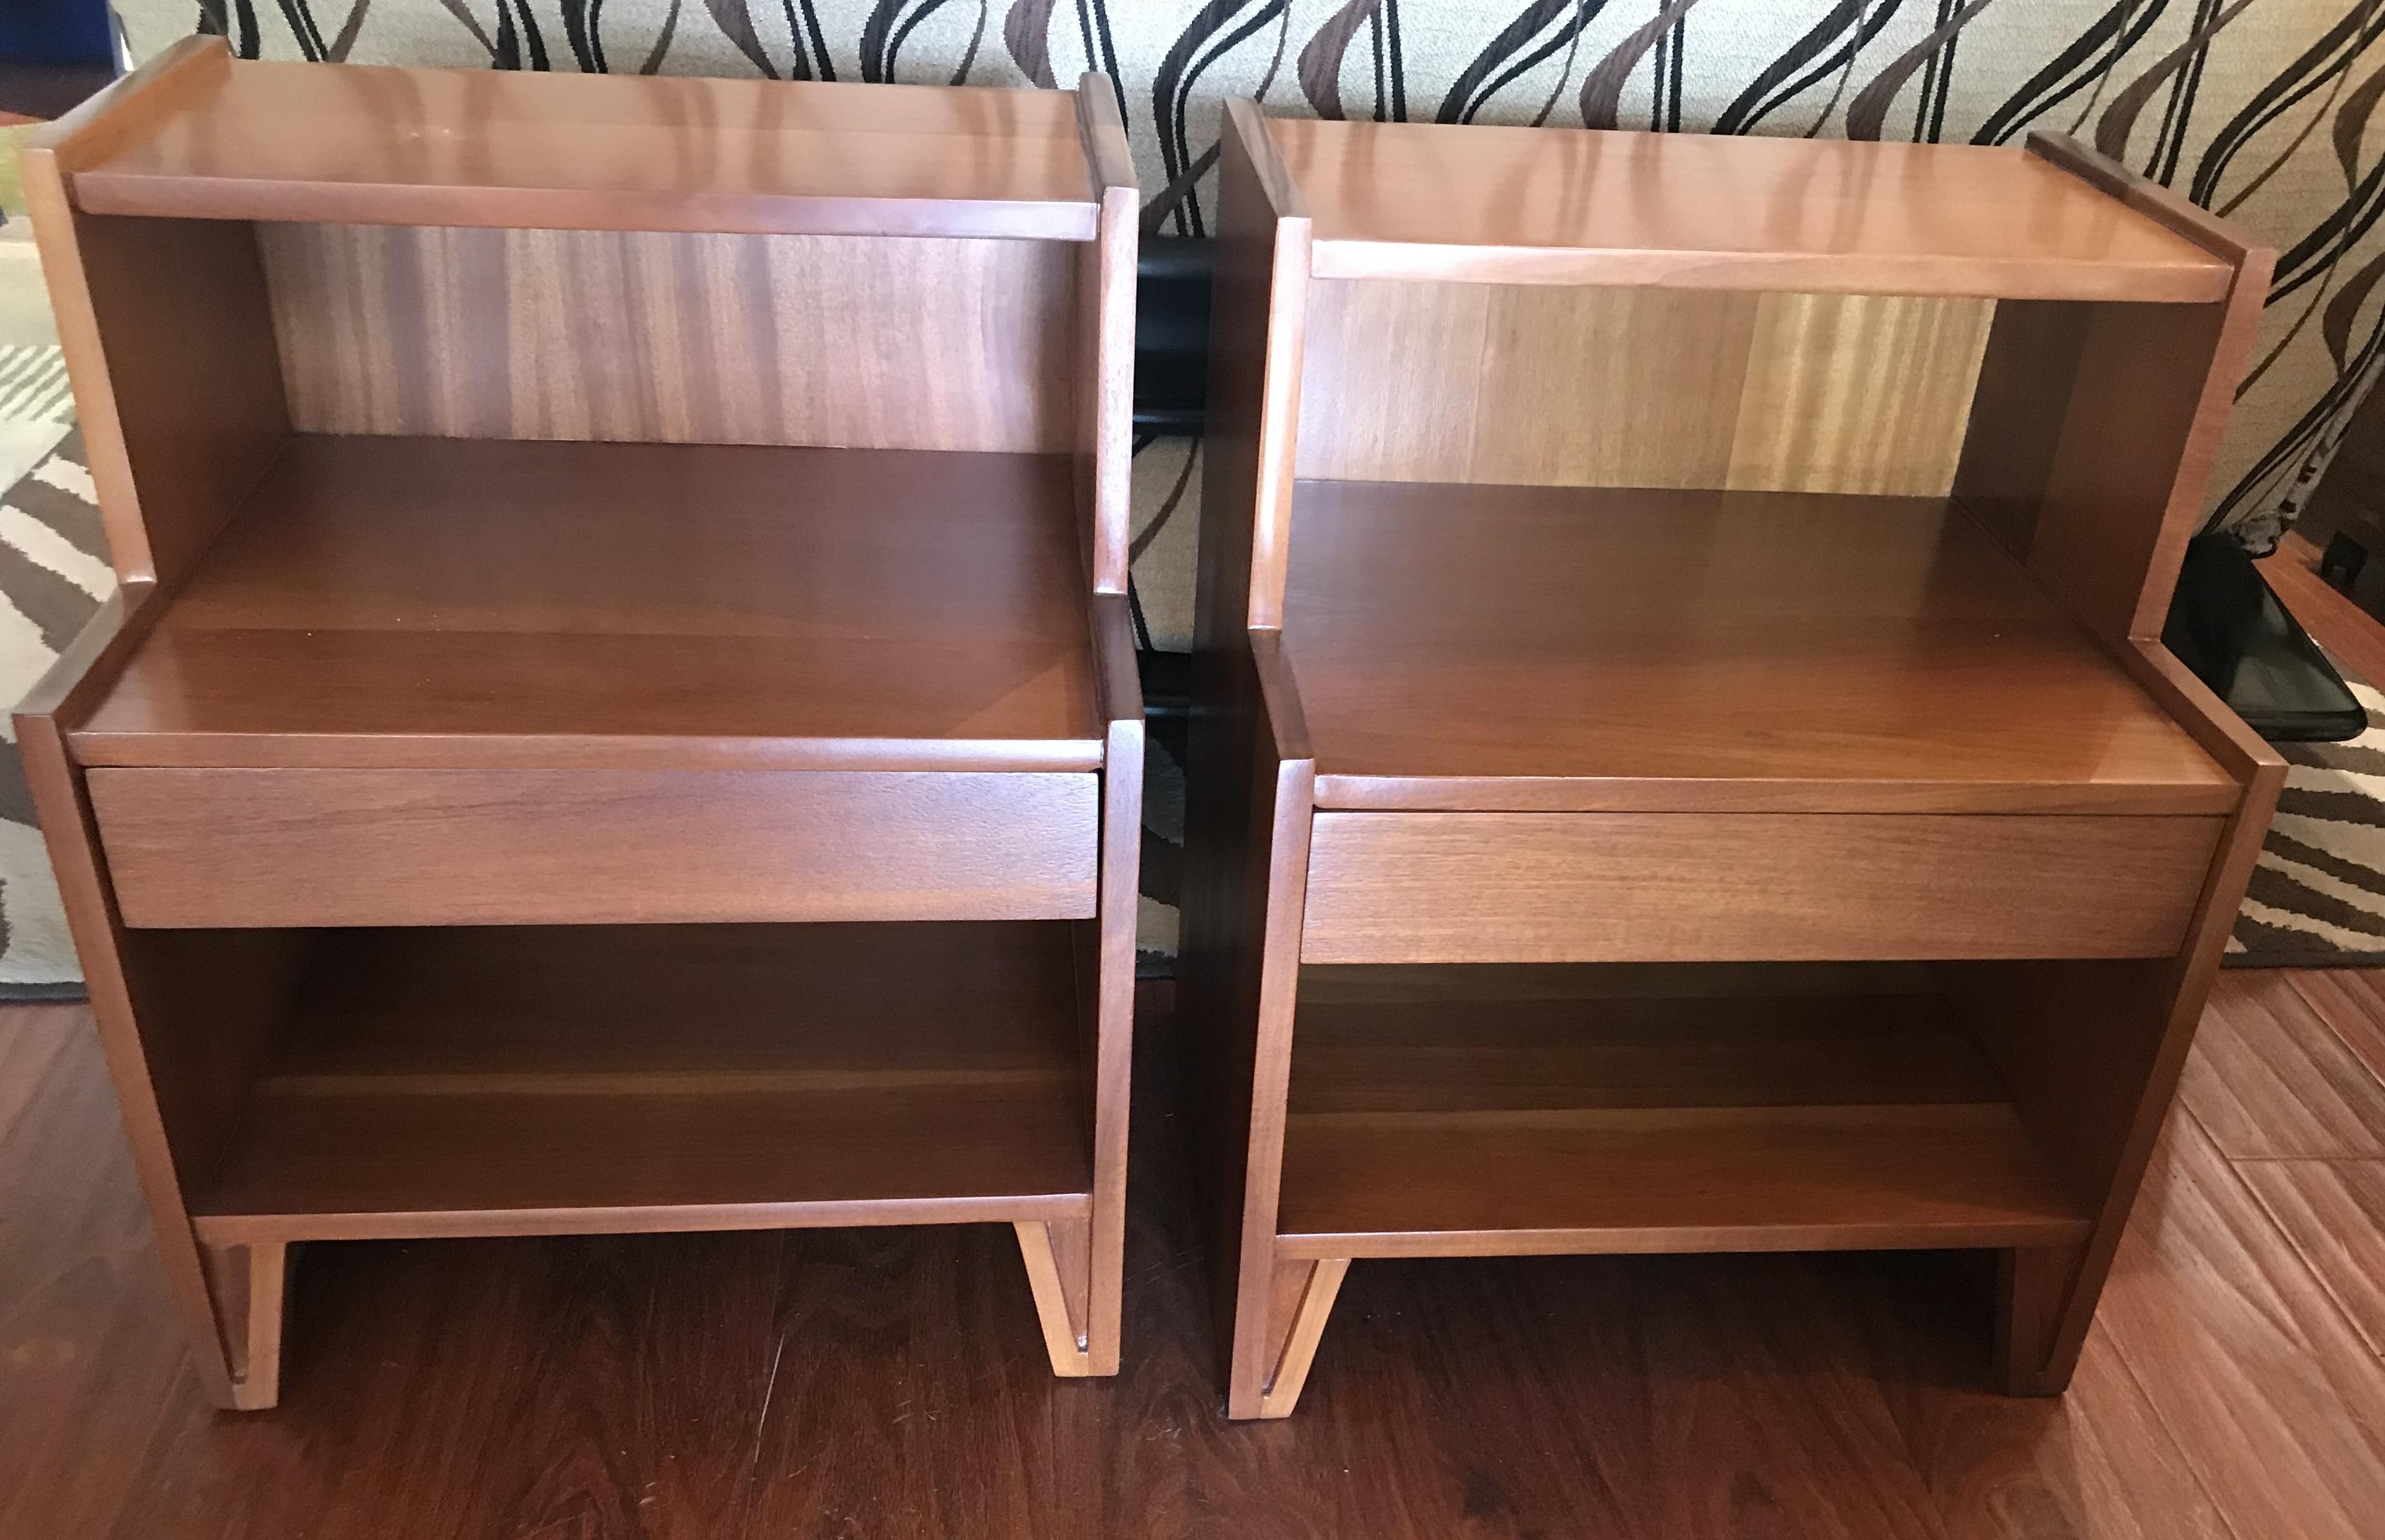 Clean lines pair of walnut nightstands made in the 1950s by Landstrom Furniture Corporation.
The height of the lower part is 17